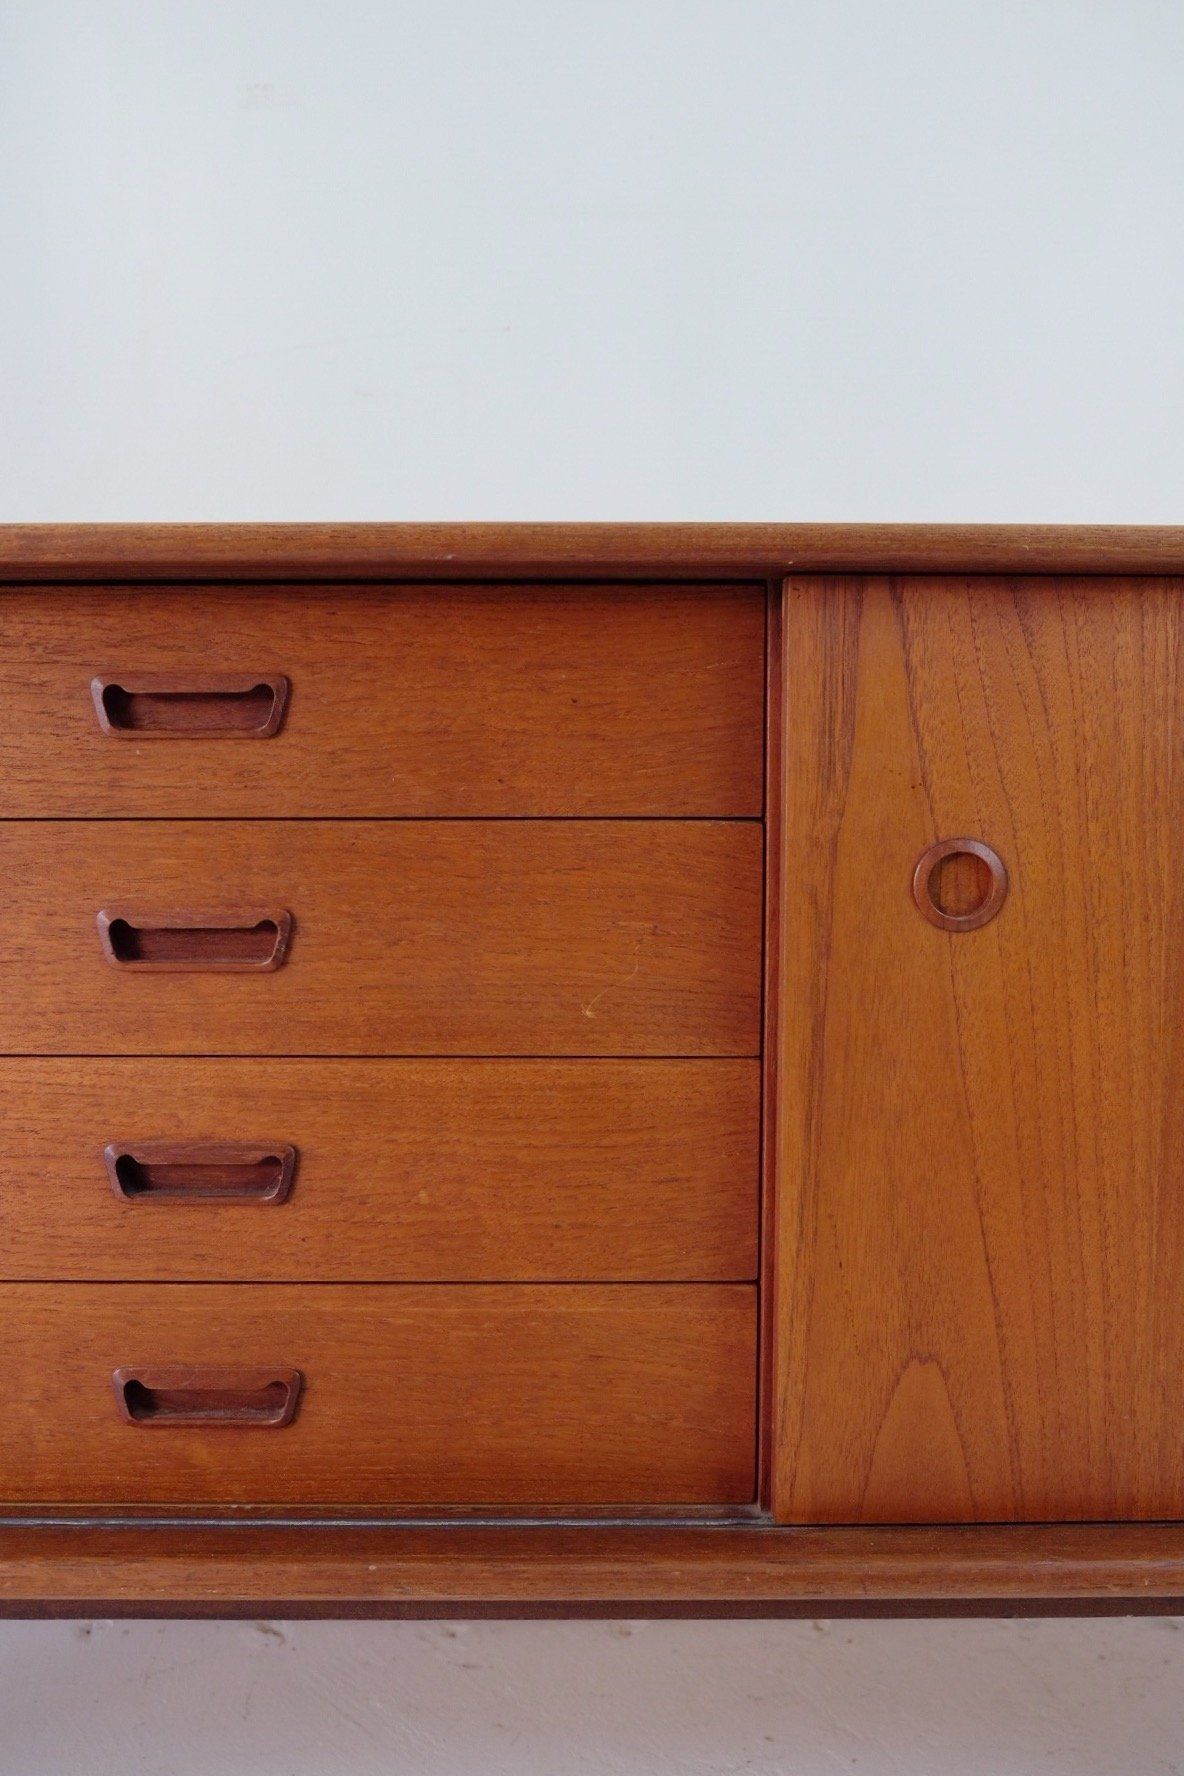 Danish Modern Teak Sideboard Credenza Buffet Cabinet In The Style Of Intended For Solar Refinement Sideboards (View 20 of 30)